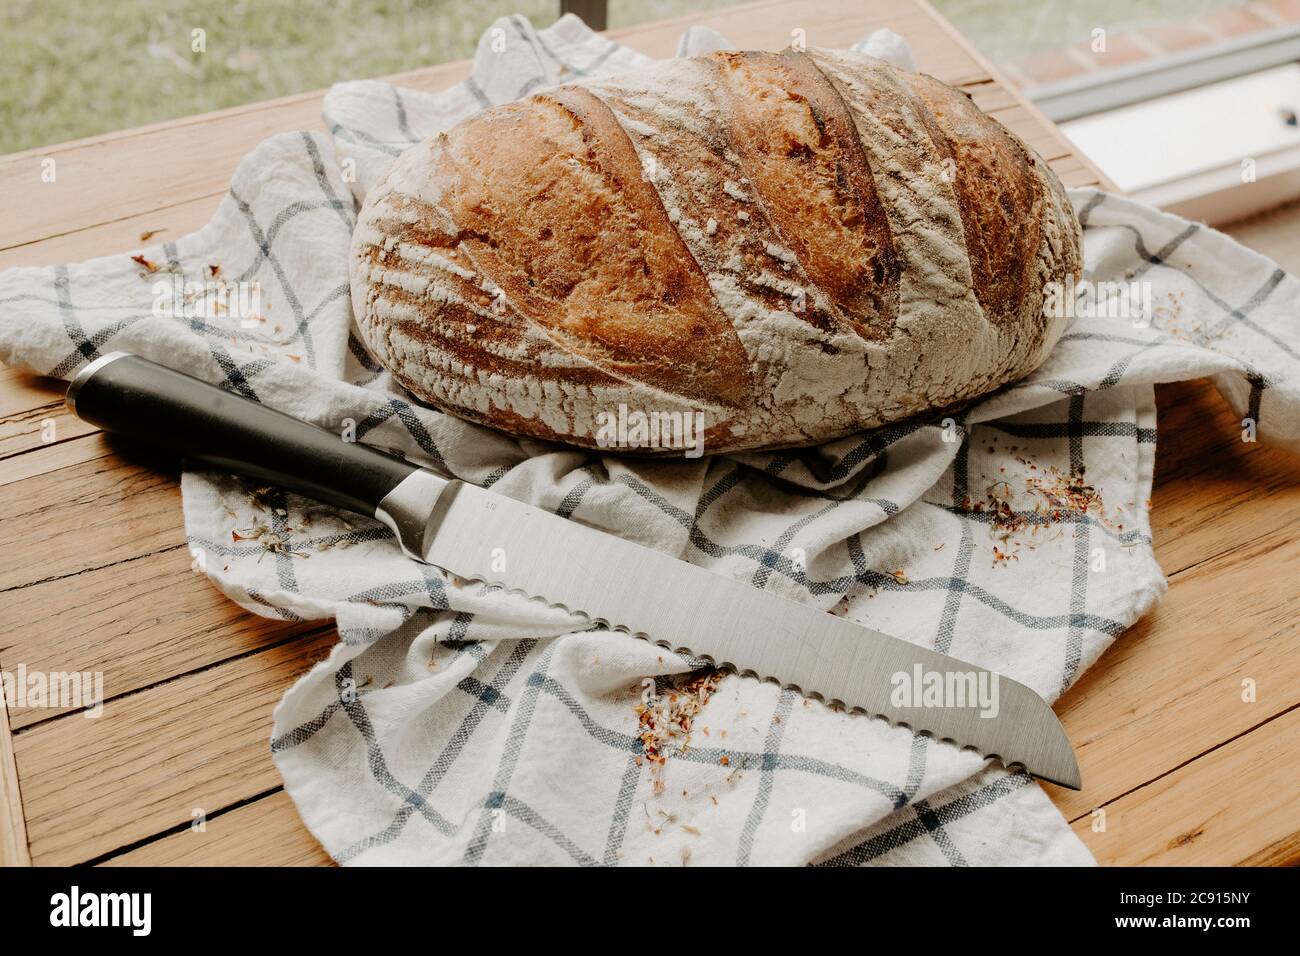 Home made Sour dough bread cooling on a tea towel which is on a wooden chopping platter board, wild dried flowers are sprinkled around Stock Photo